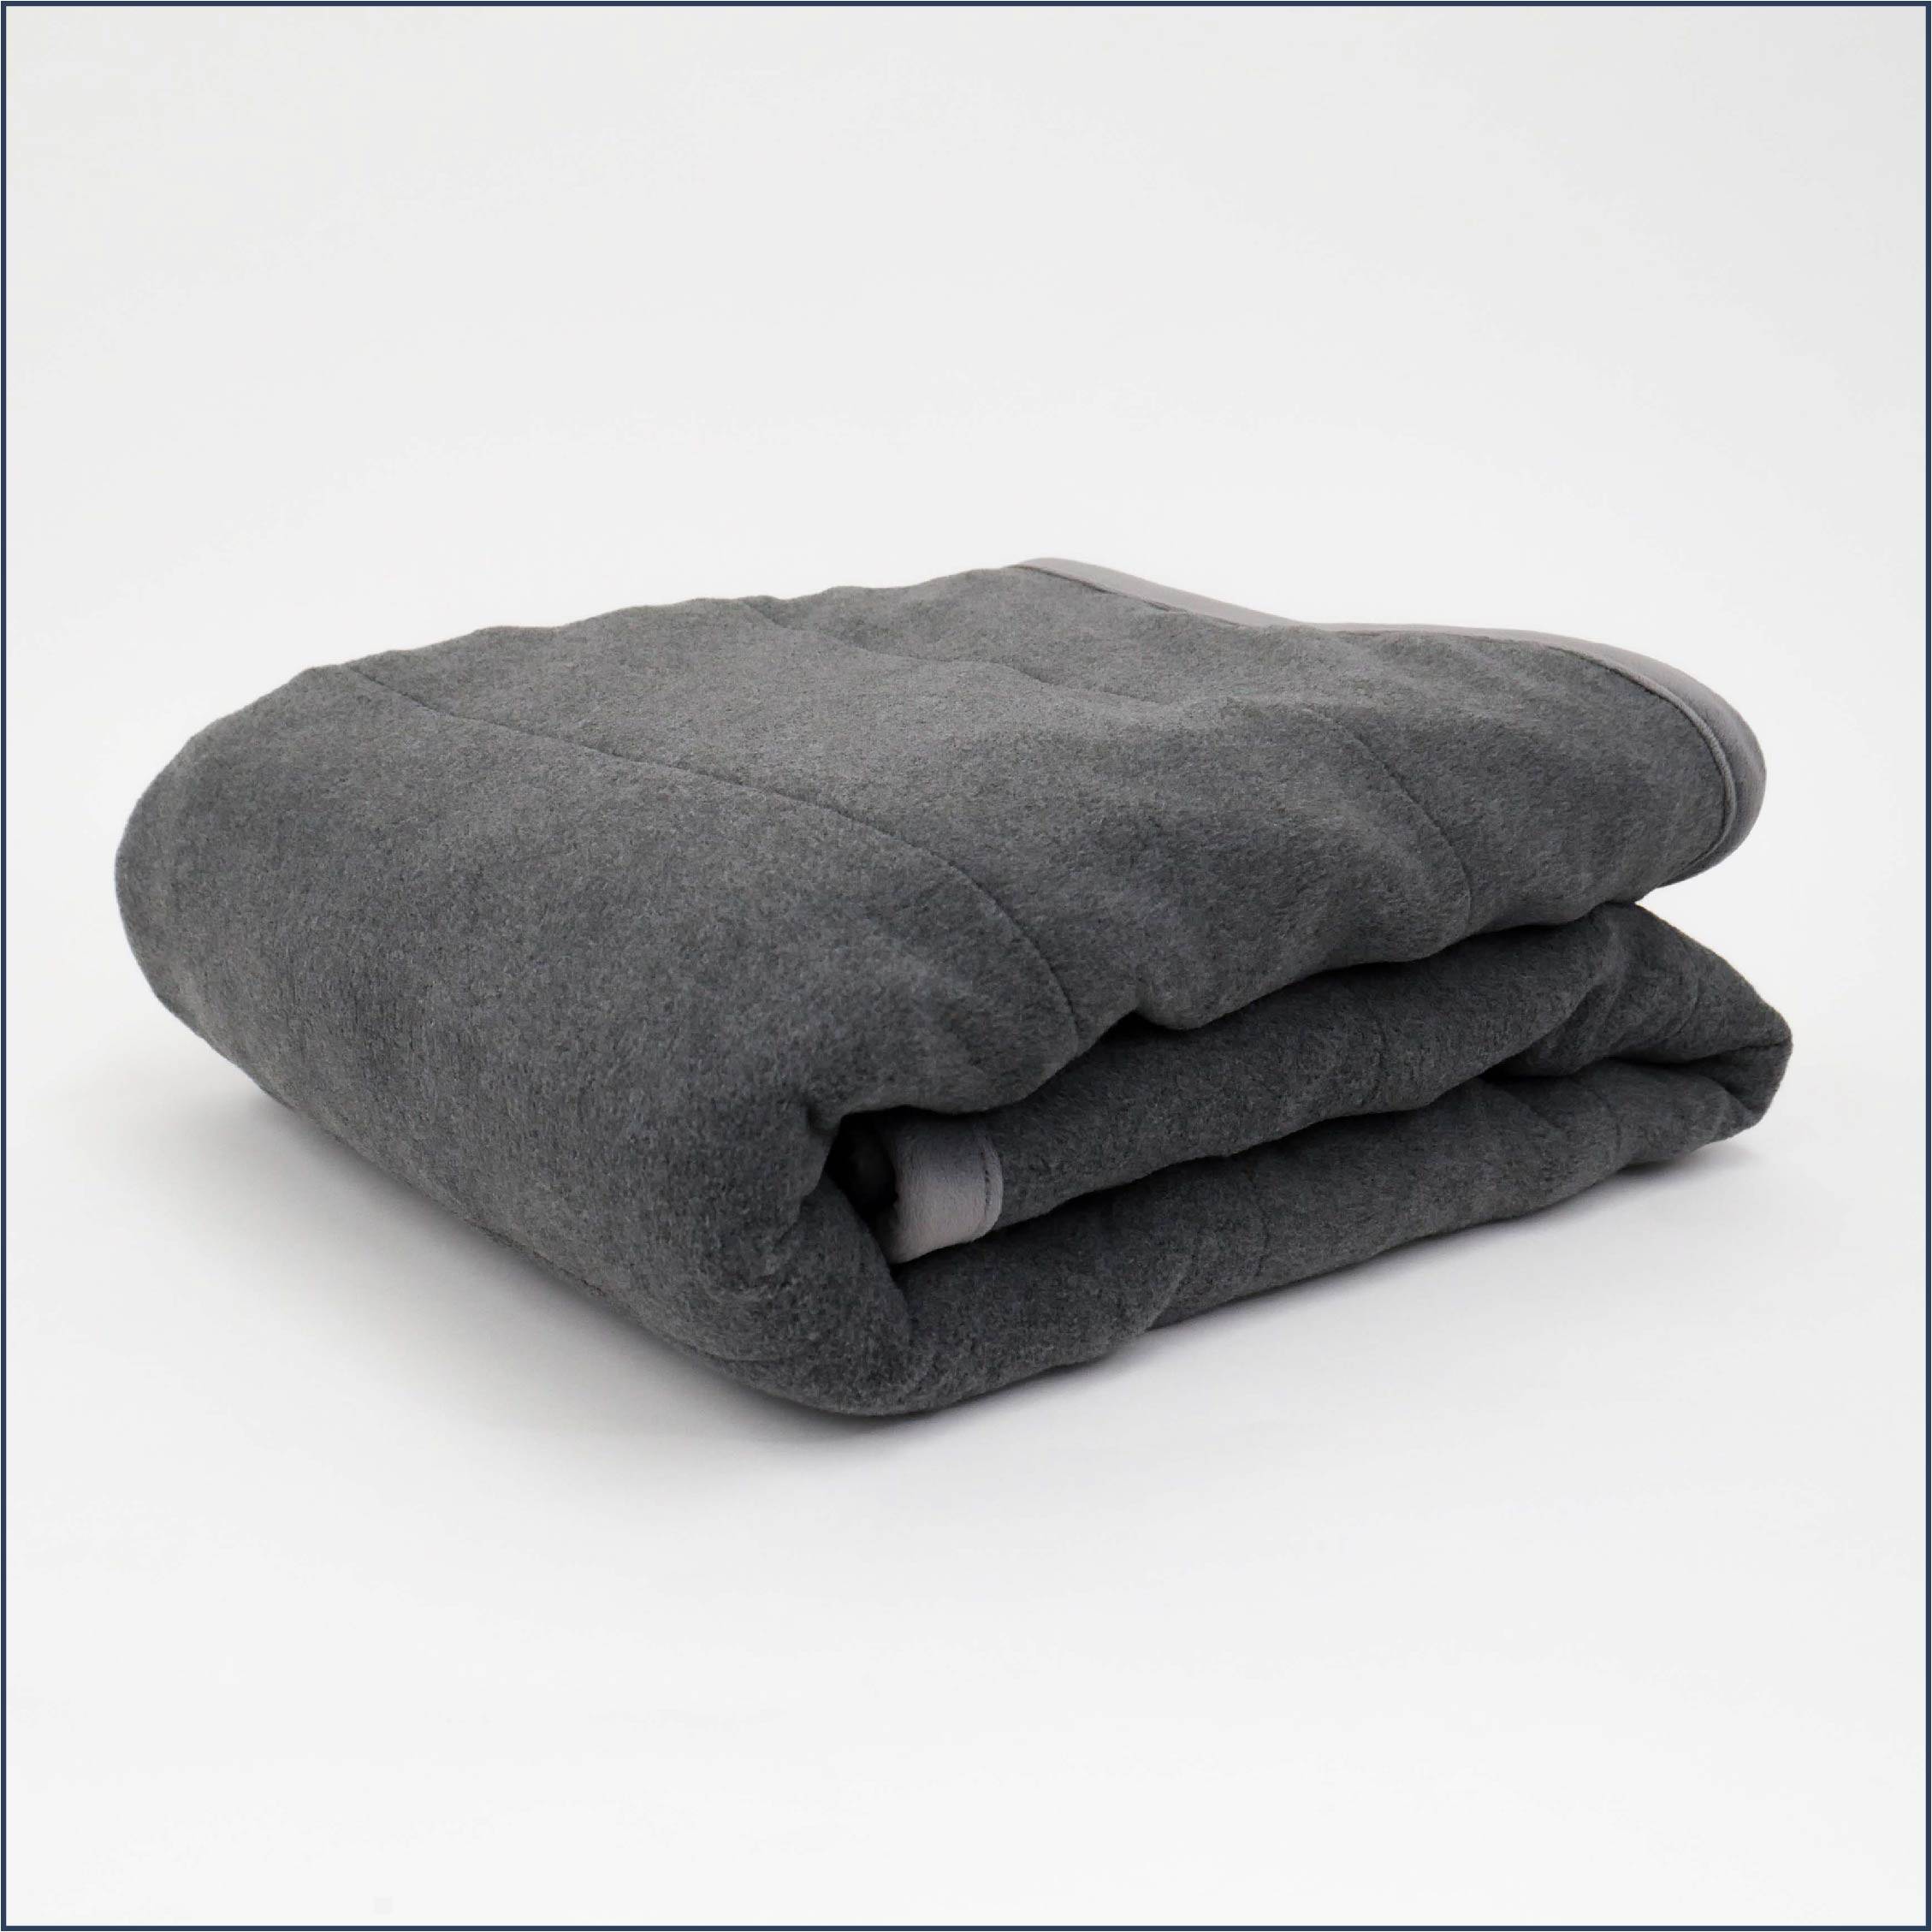 The Tuc Fleece Weighted Blanket folded on a white background